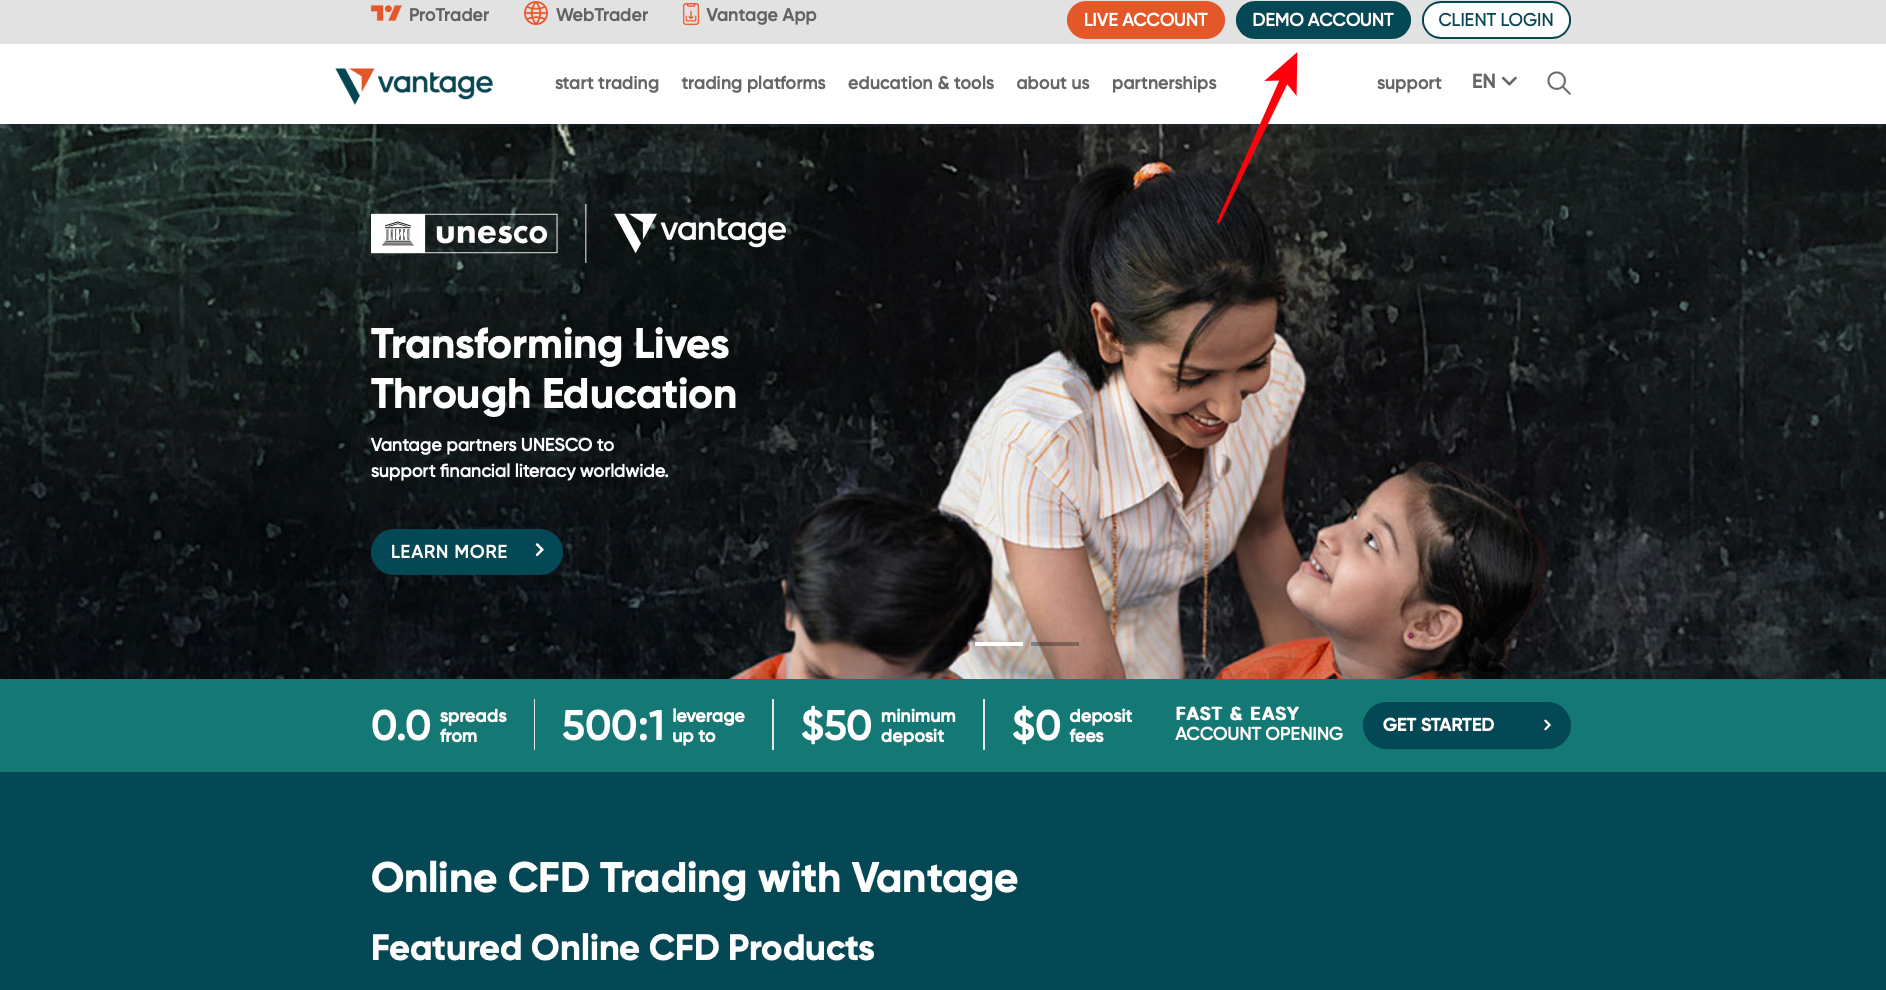 How to sign up for a demo account on Vantage Markets